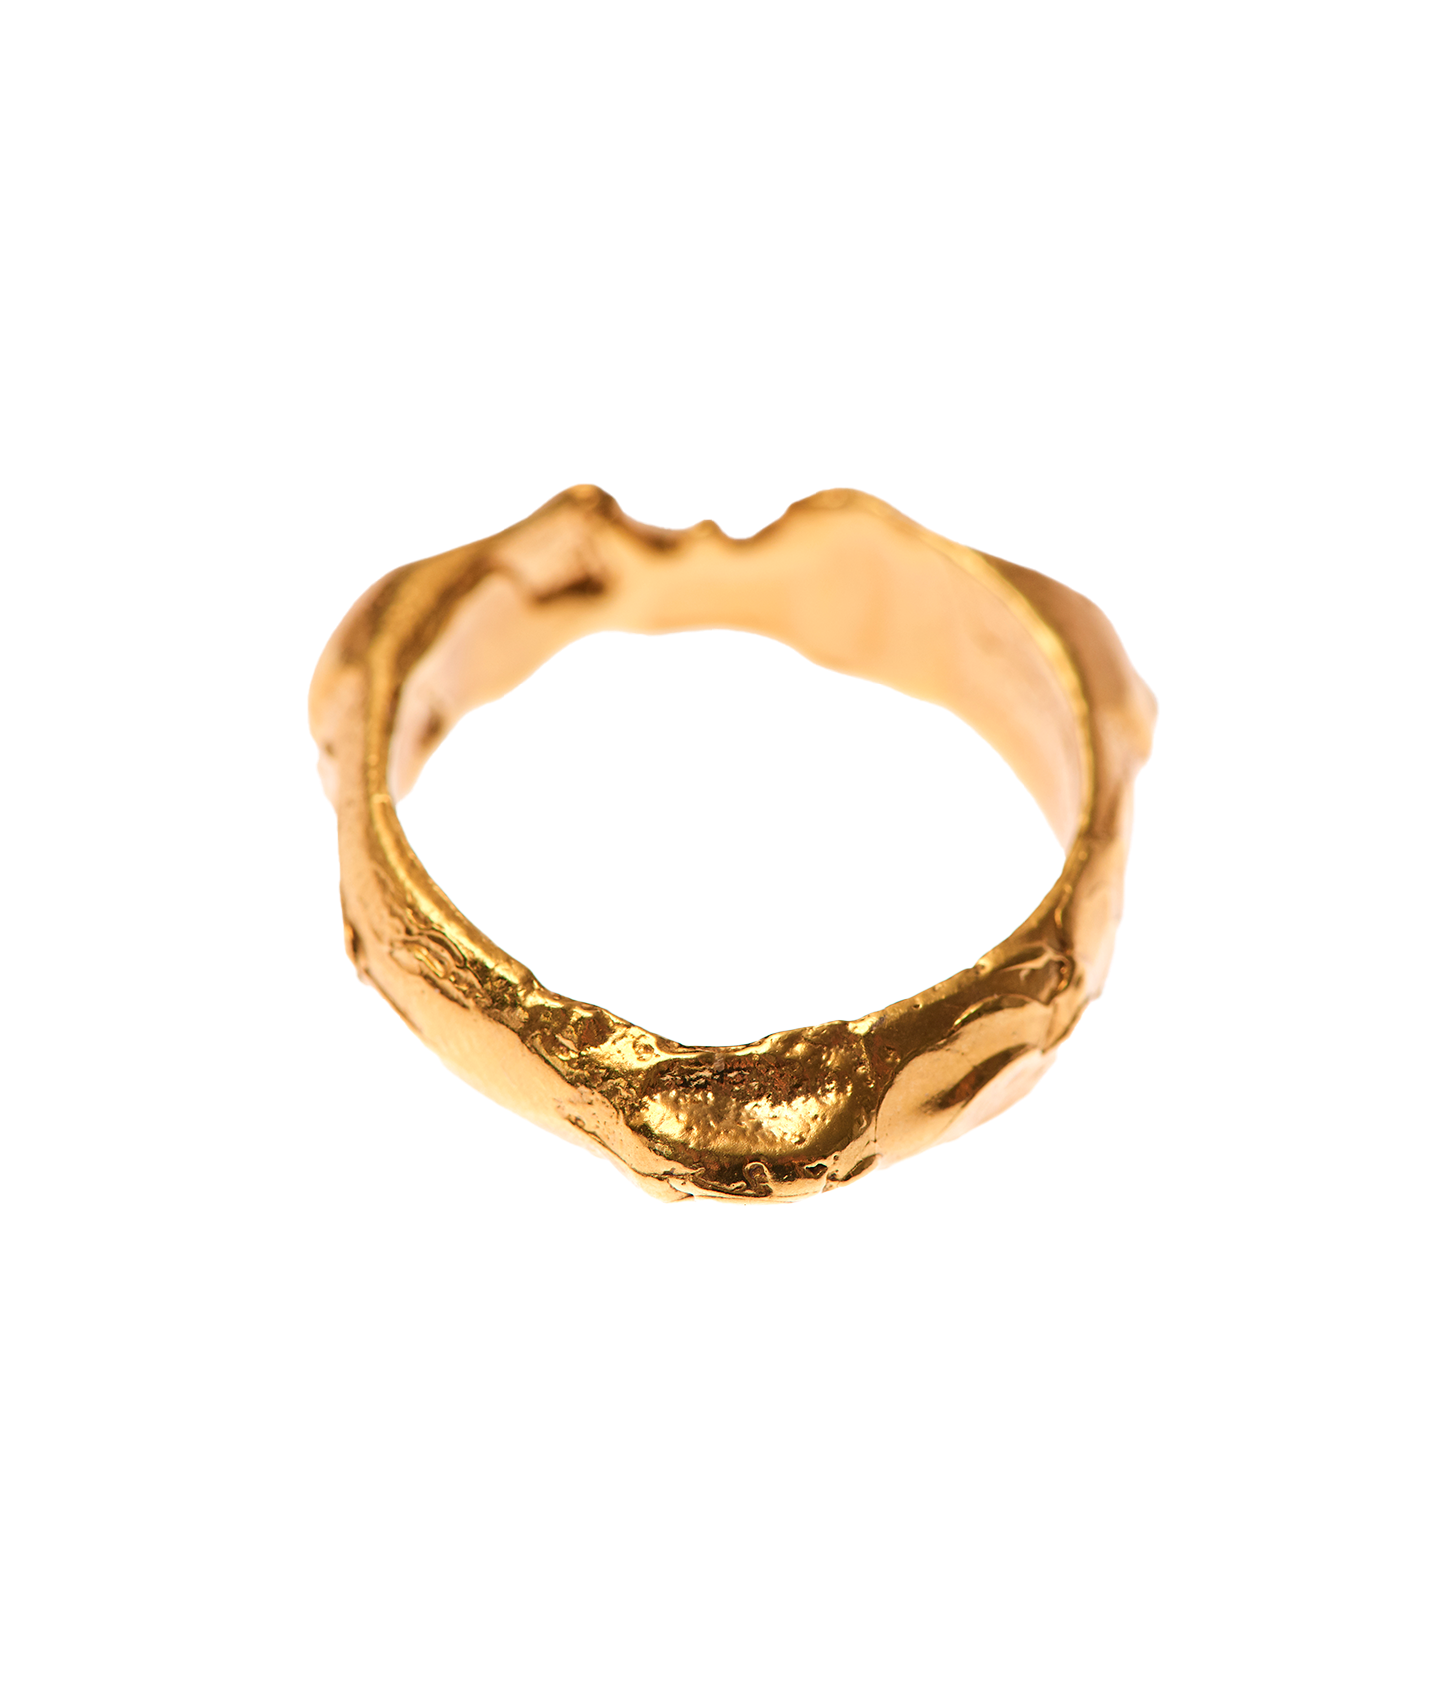 Alighieri Gold Edge of the Abyss Sculpted Ring